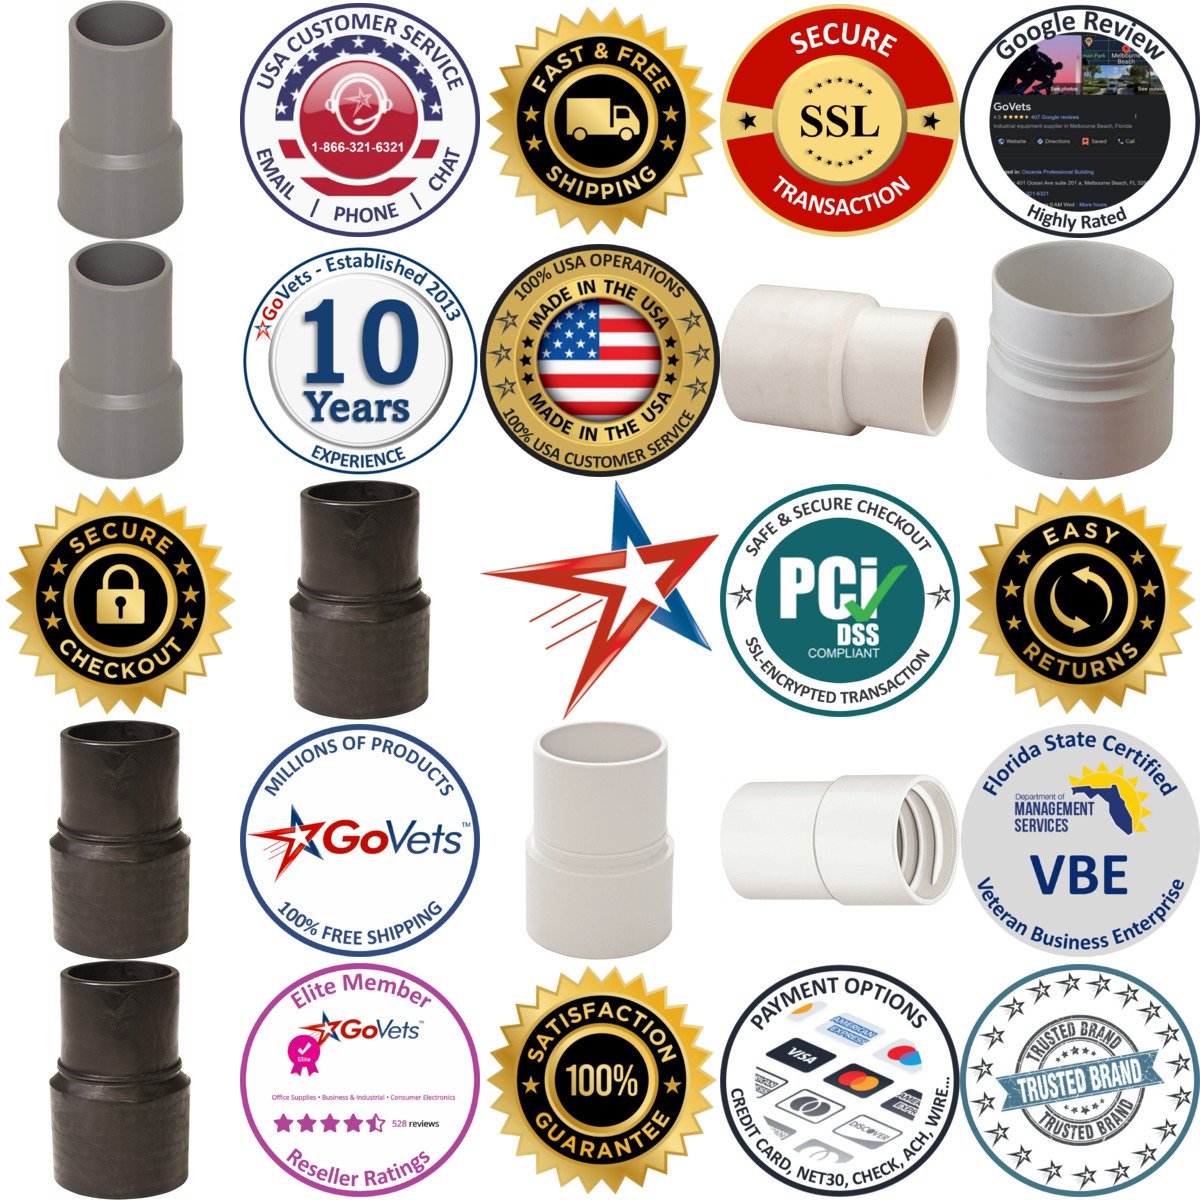 A selection of Hose Cuffs products on GoVets